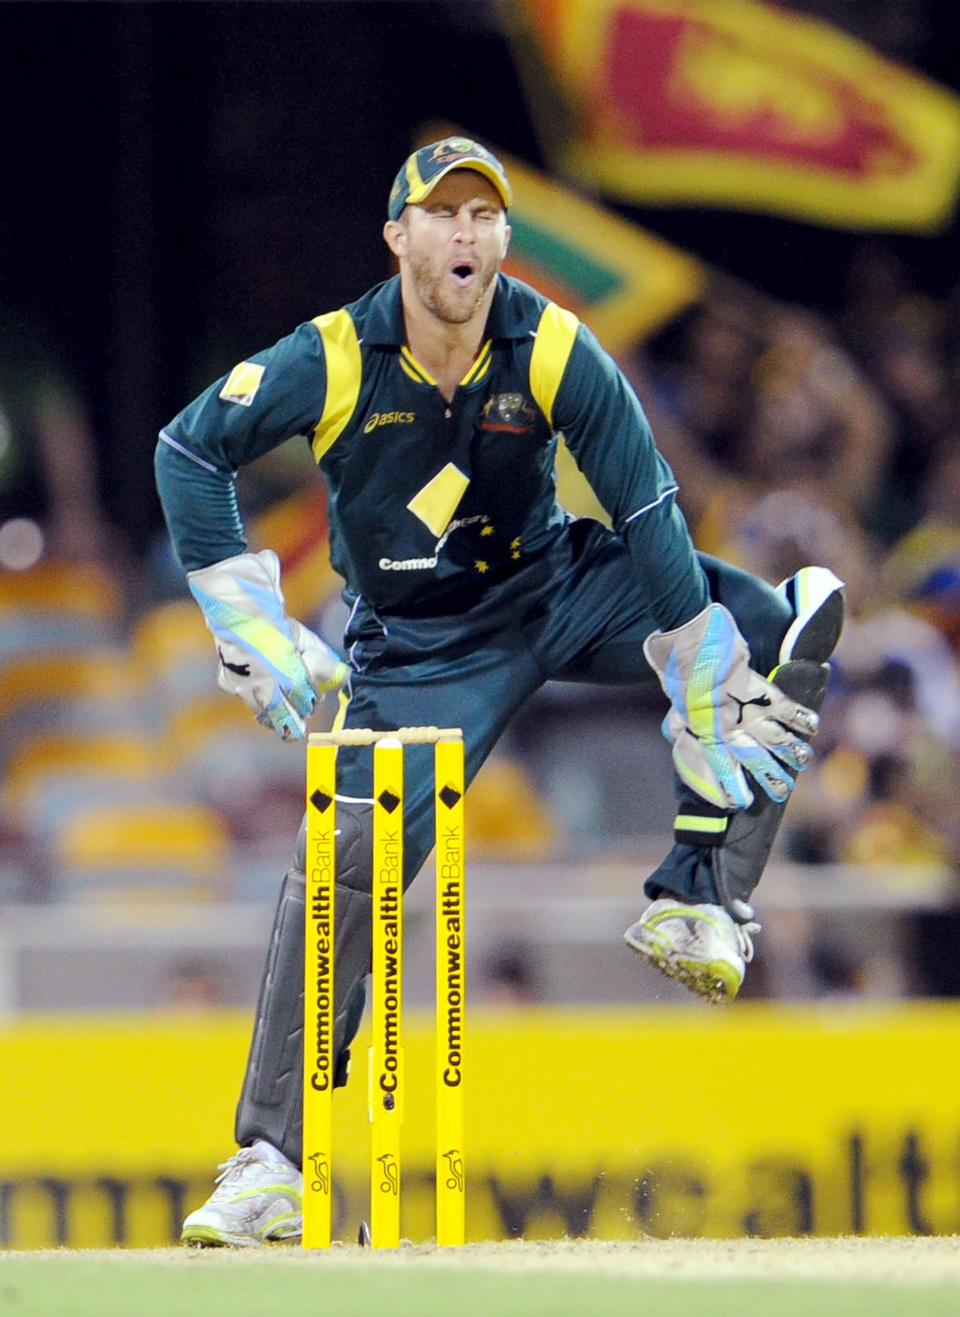 Australian wicketkeeper Matthew Wade hobbles after been hit by the ball in the first international one-day cricket final at the Gabba in Brisbane, on March 4, 2012.